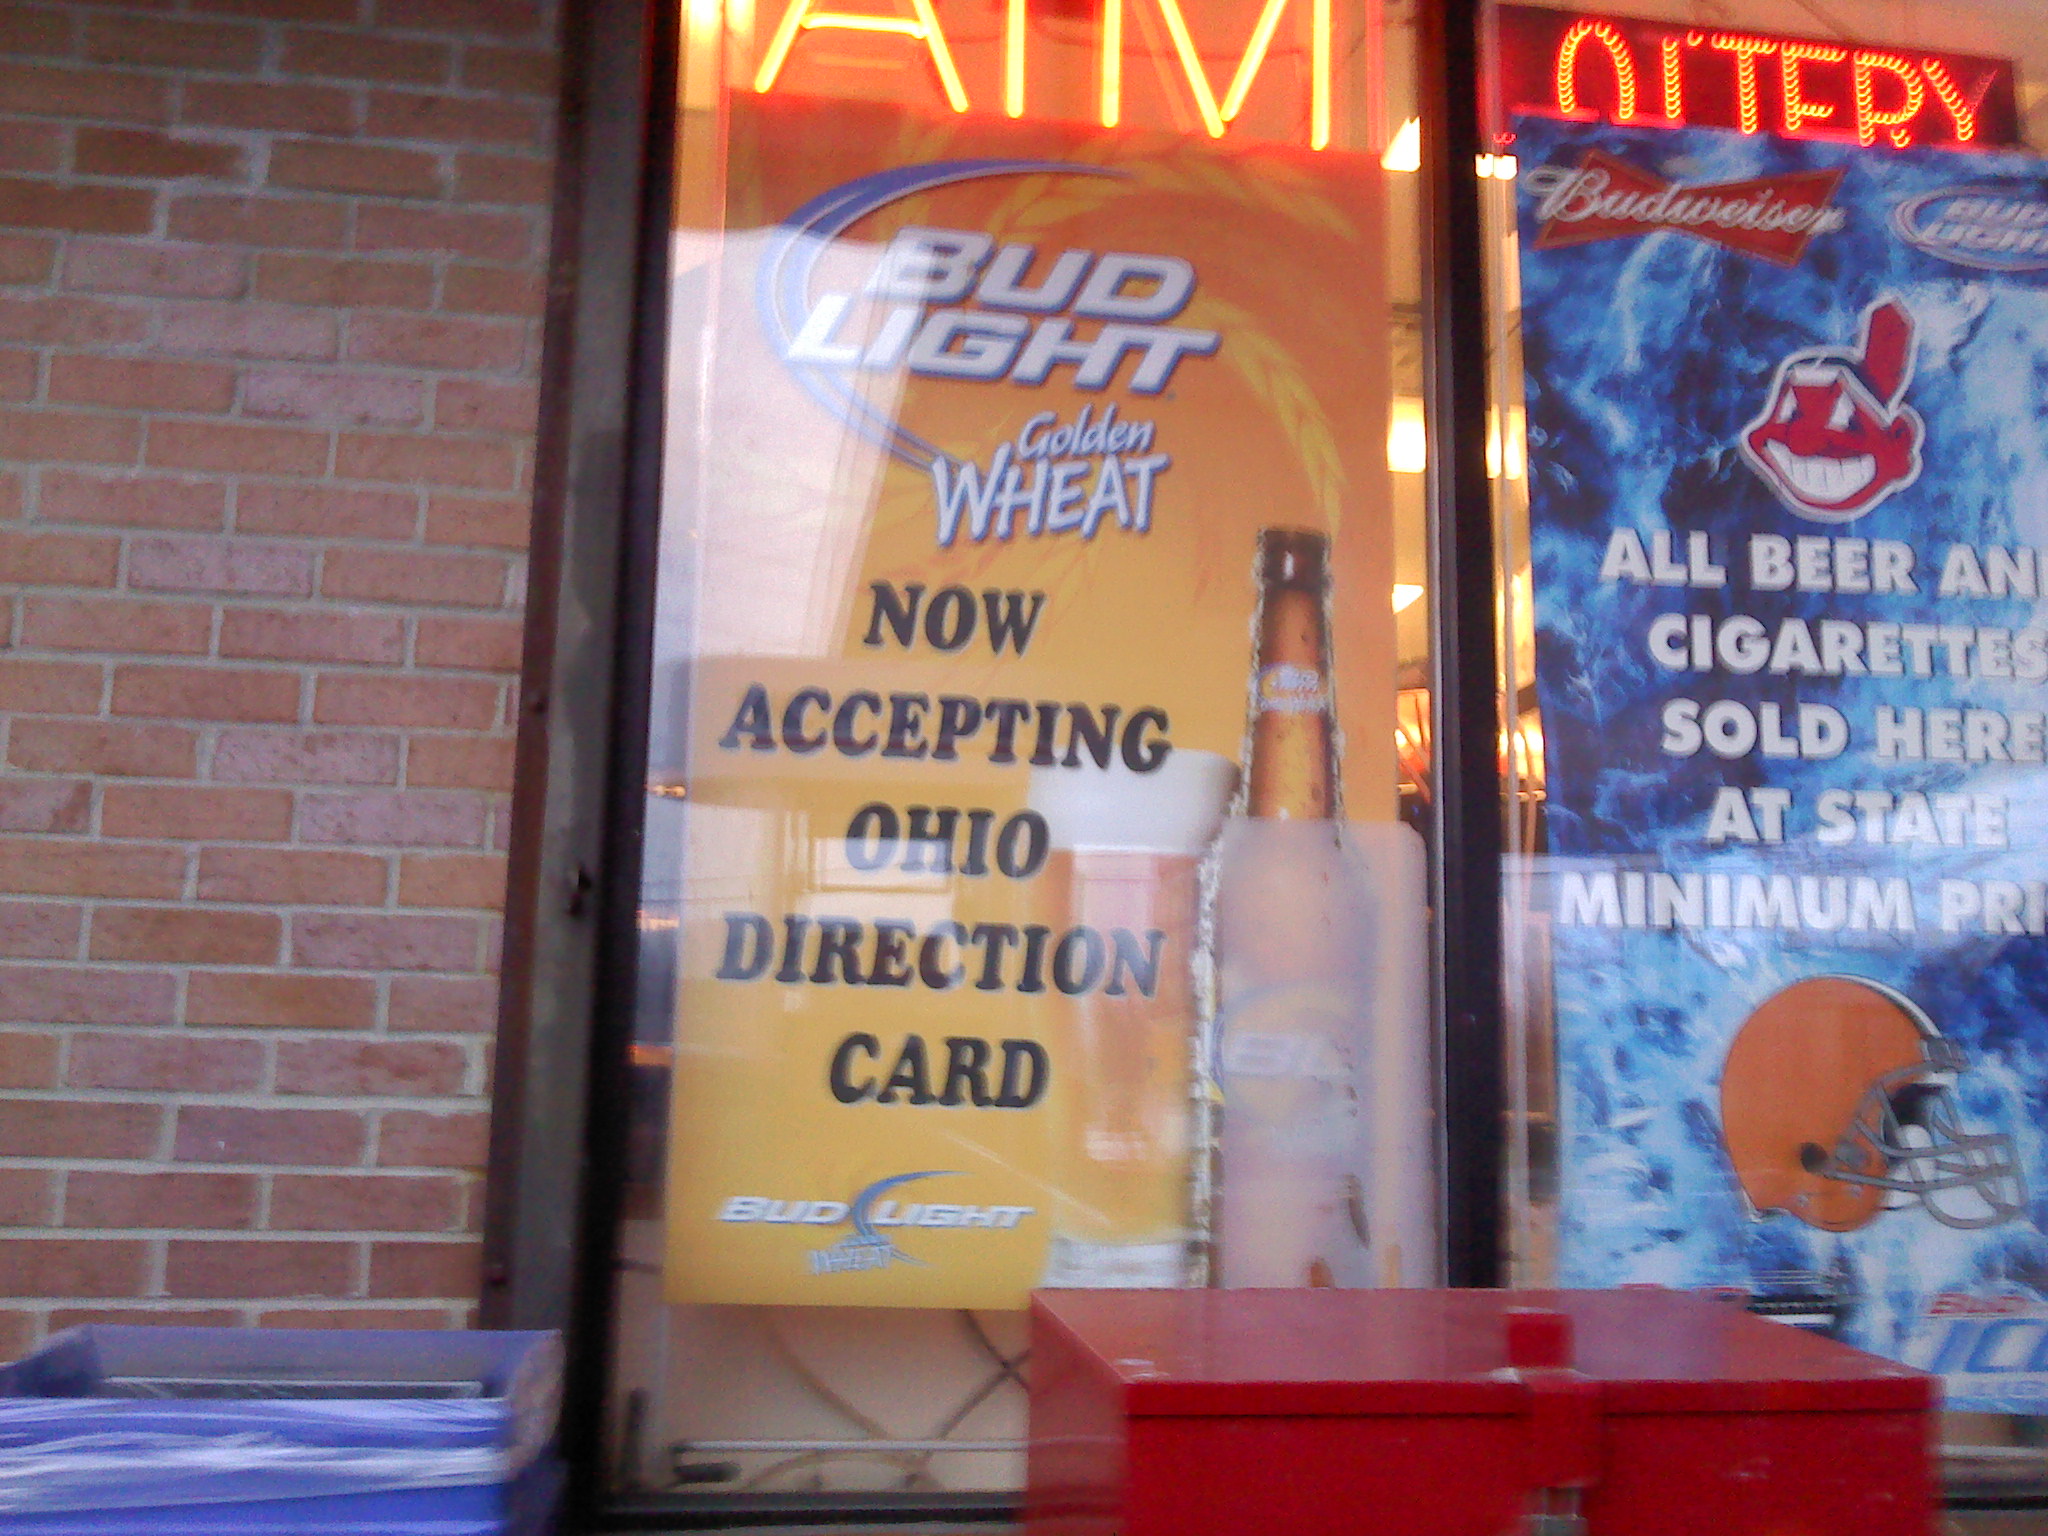 Does this mean that you can buy beer with your food stamps at this gas station?